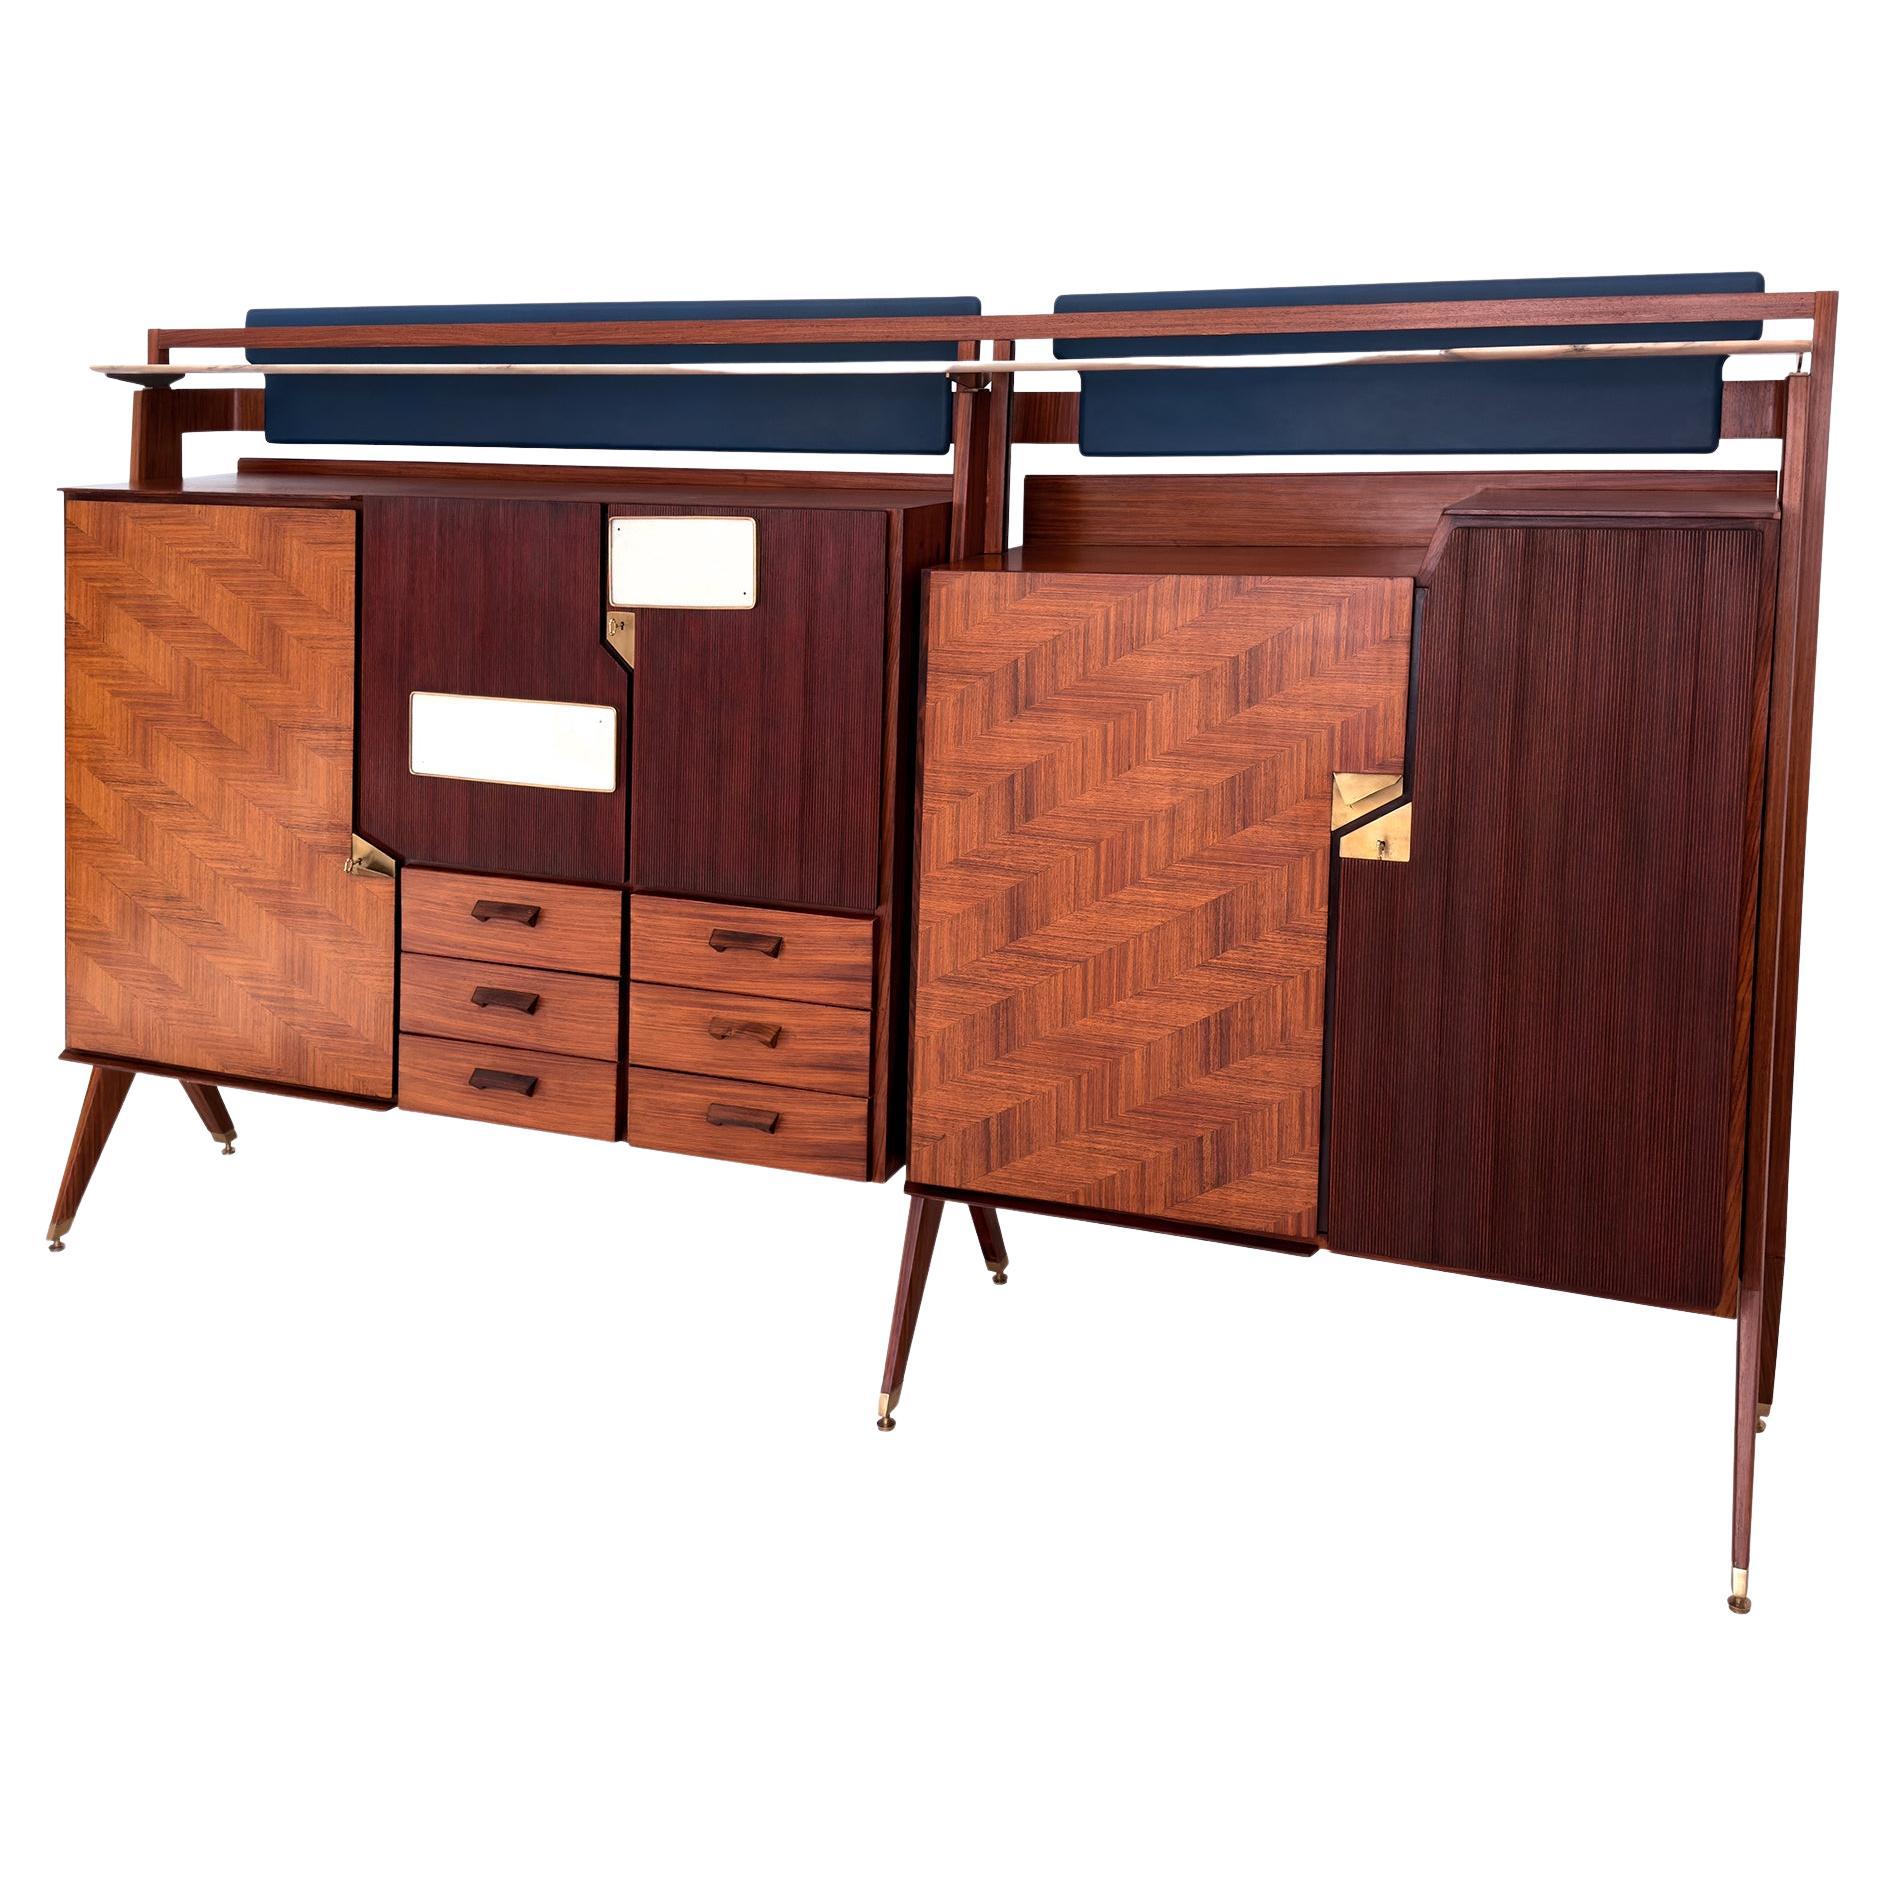 Italian Midcentury Sideboard or Bar Cabinet by La Permanente Mobili Cantù, 1950s For Sale